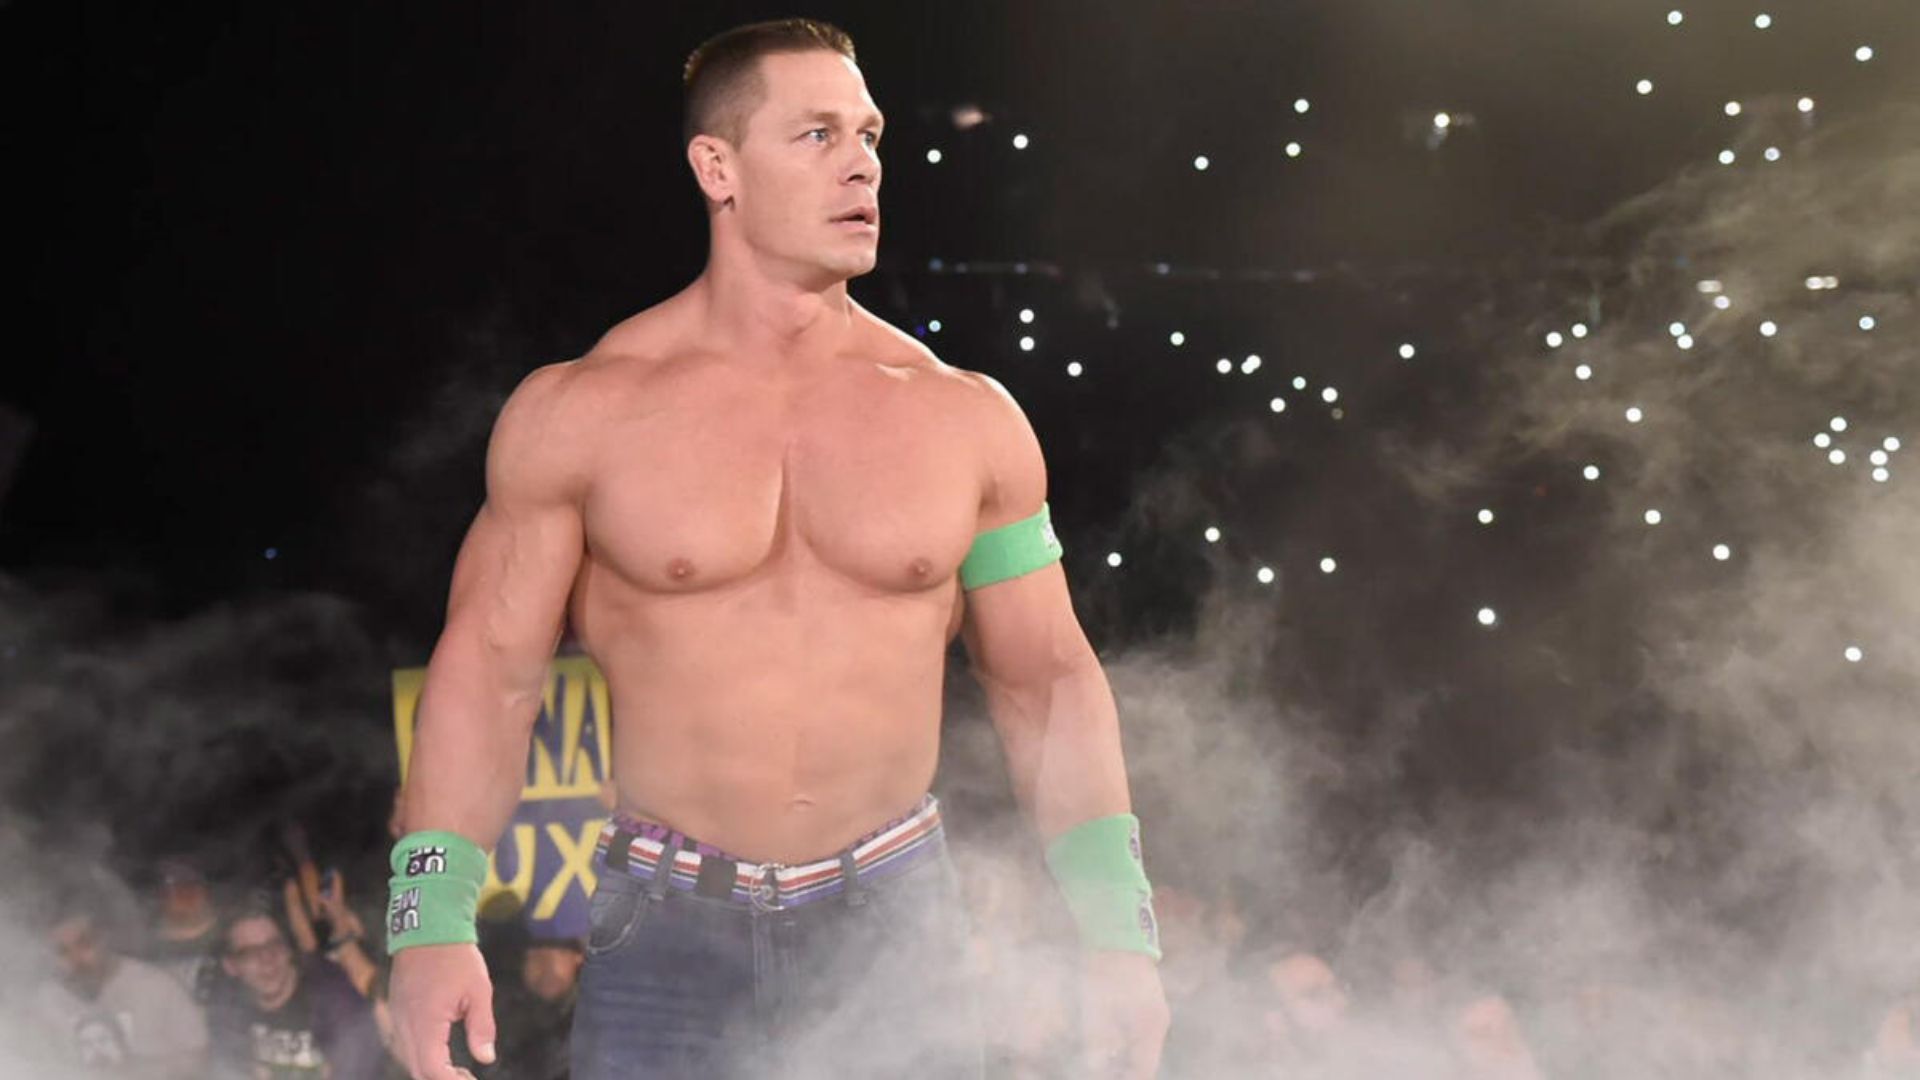 John Cena at WrestleMania 34, when he faced The Undertaker [Photo credit: WWE]